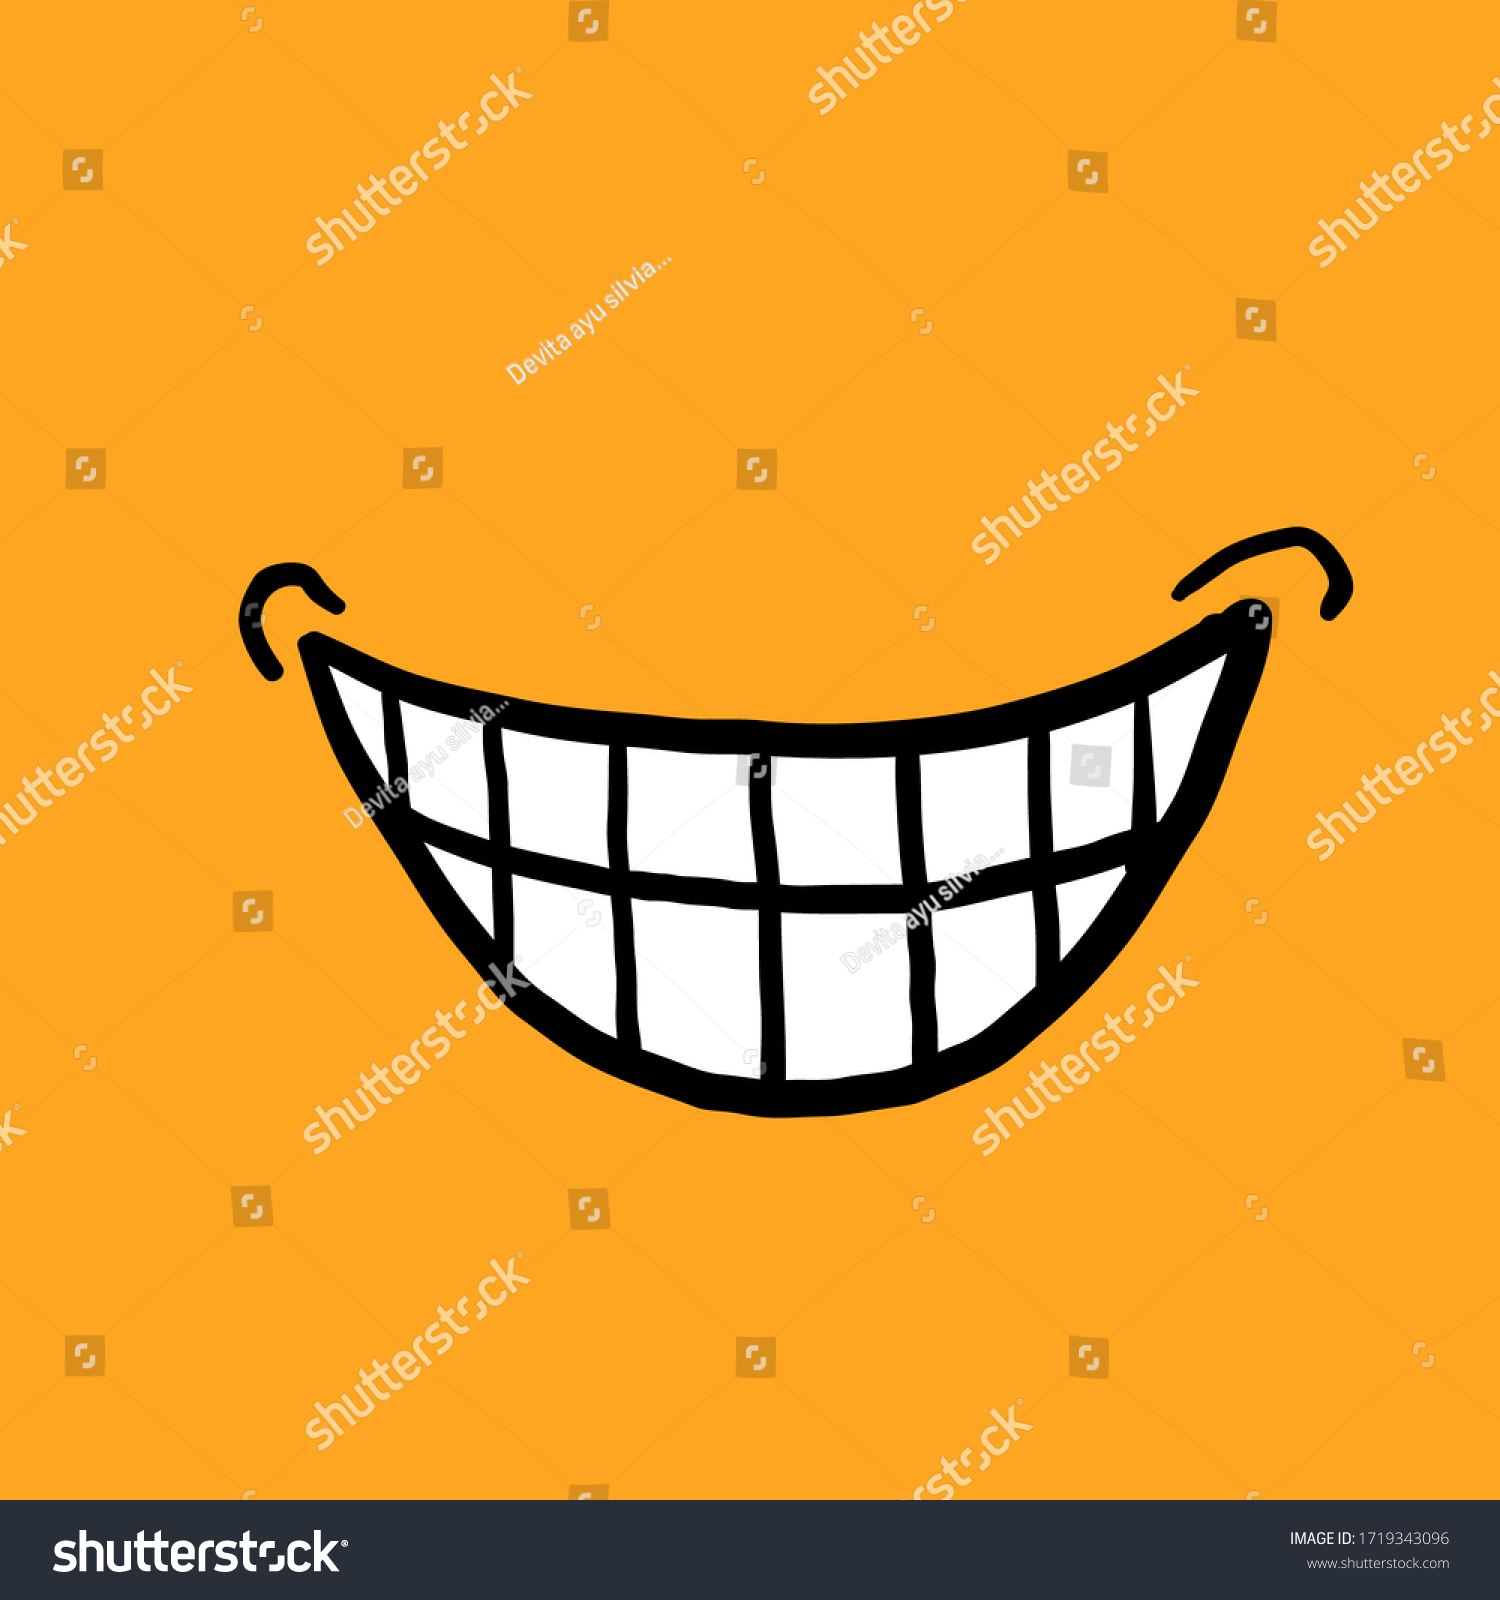 hand drawn doodle smile or laughing by showing teeth for discovering a plan illustration with cartoon style  #1719343096